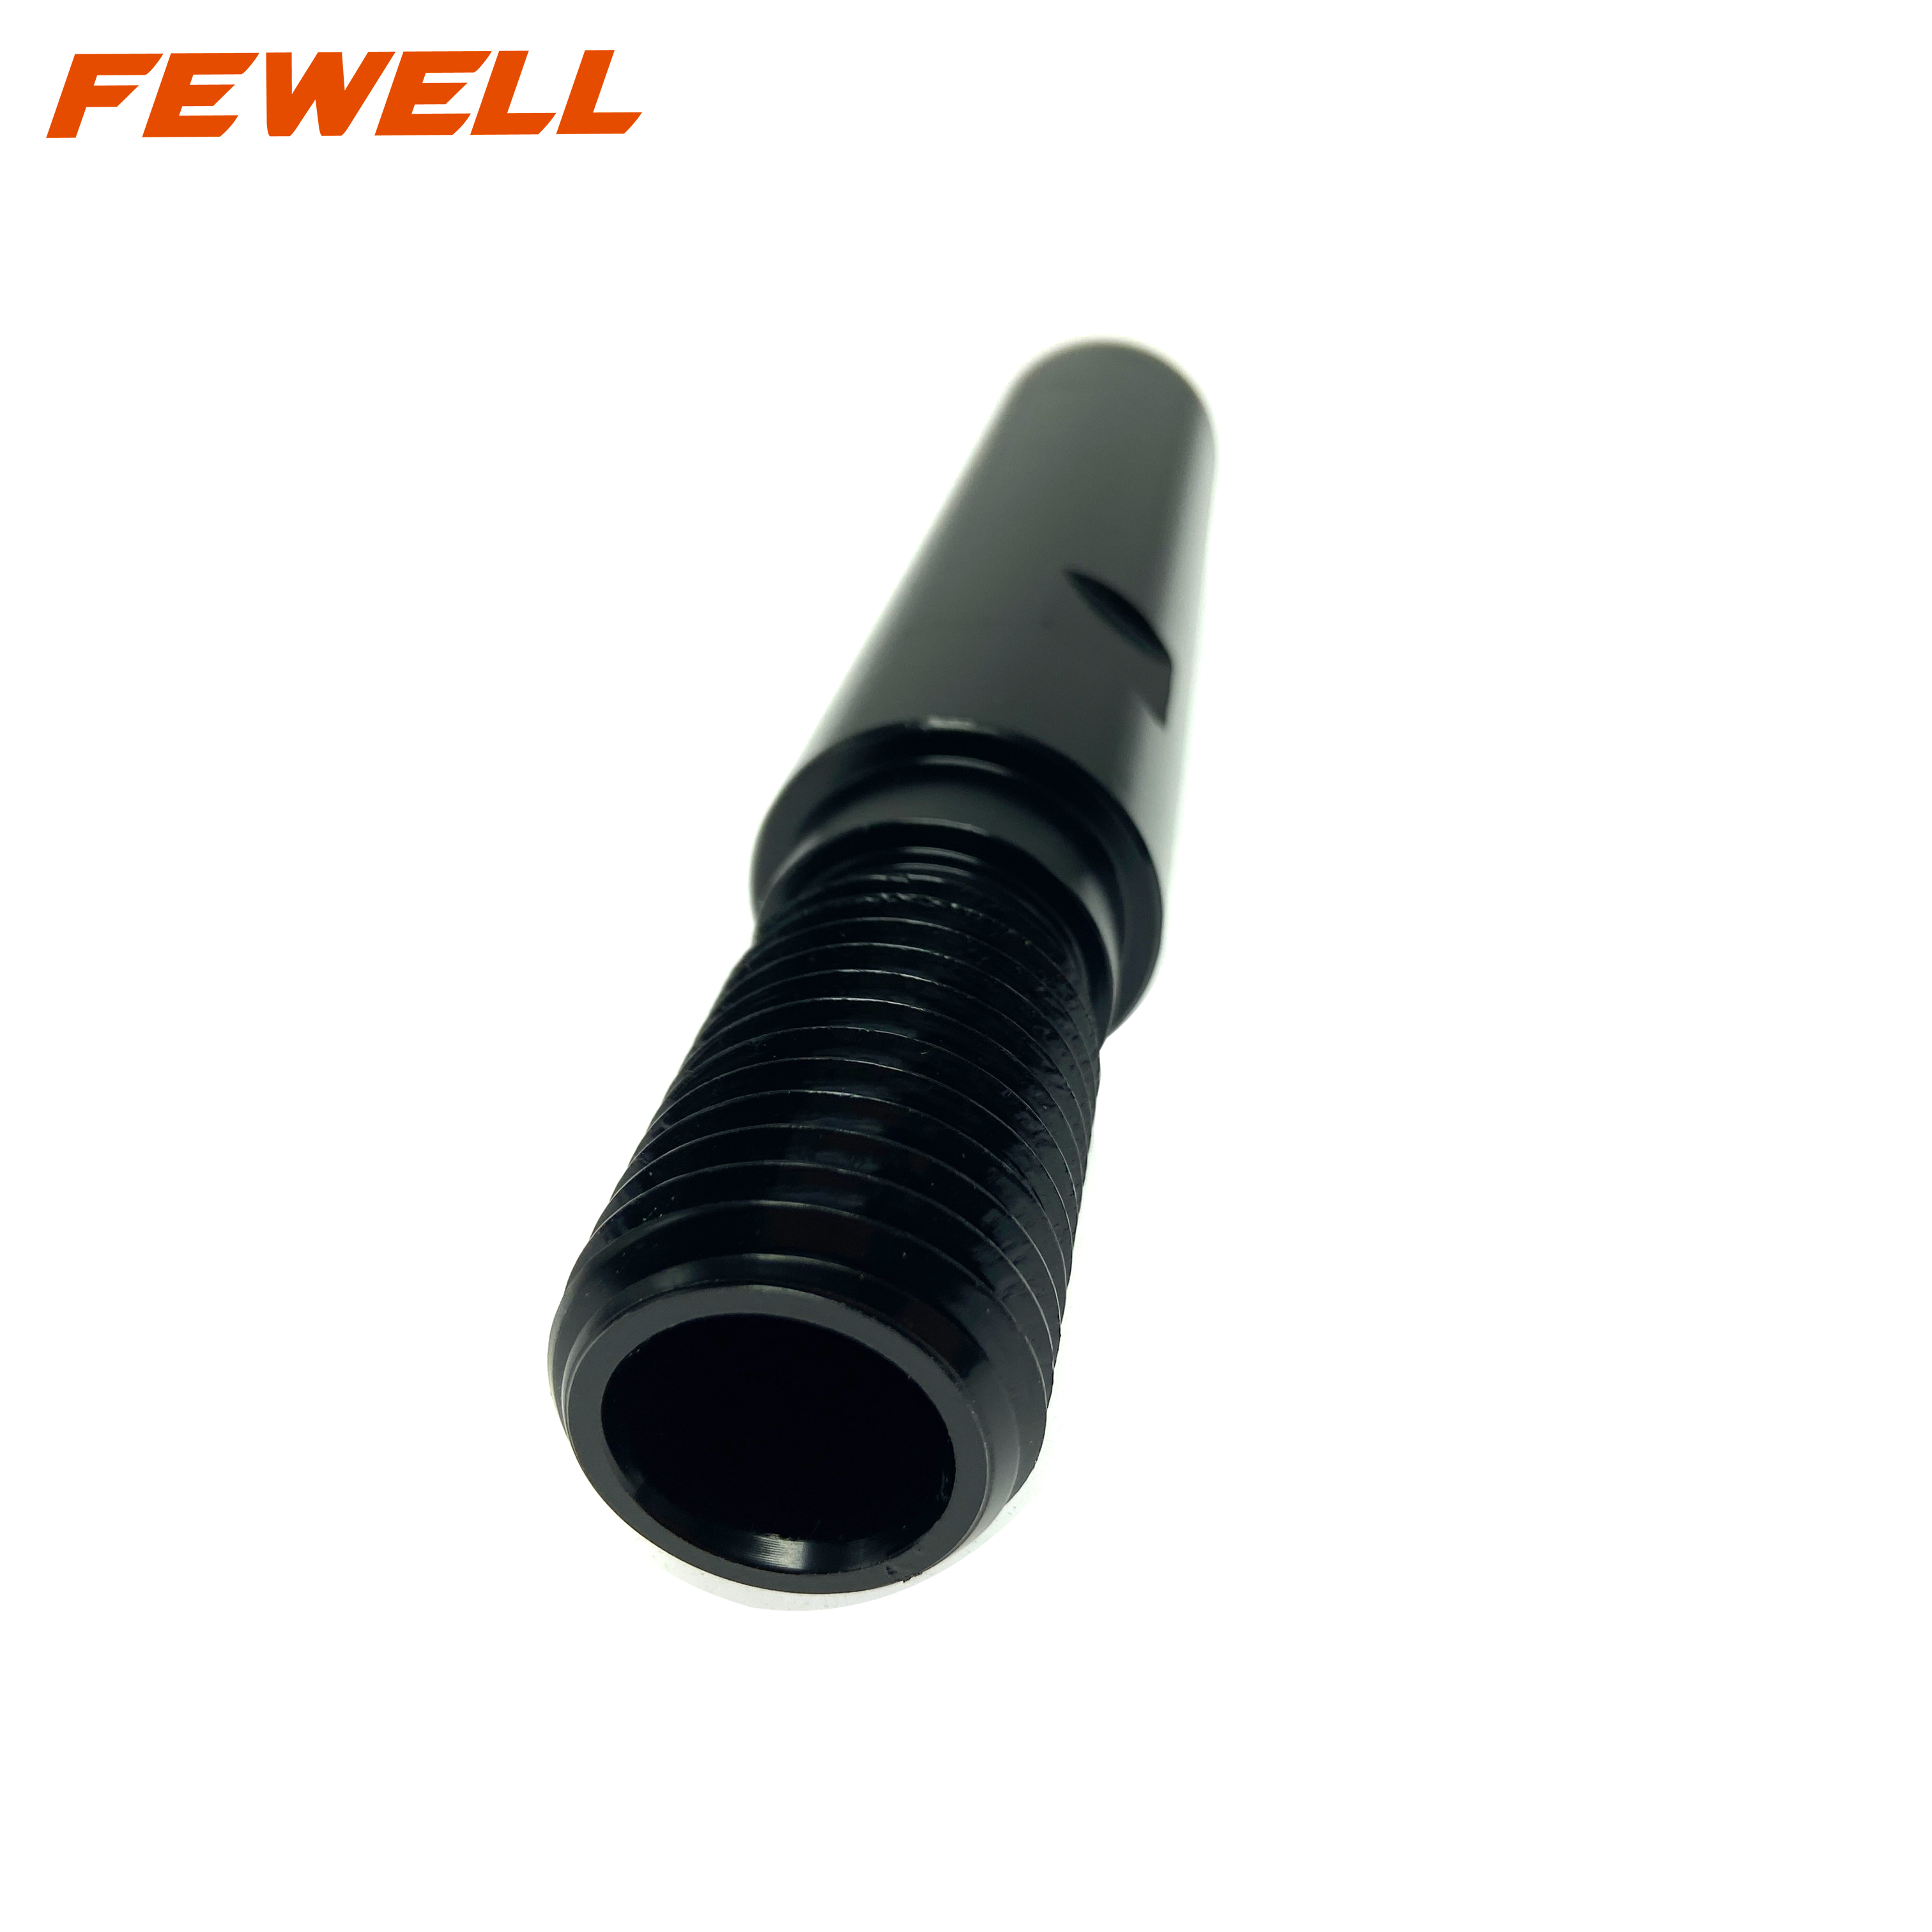 High quality 1-1/4UNC Male to1-1/4UNC 214mm Female Connection Exchange Core Drill Bit Adapter 